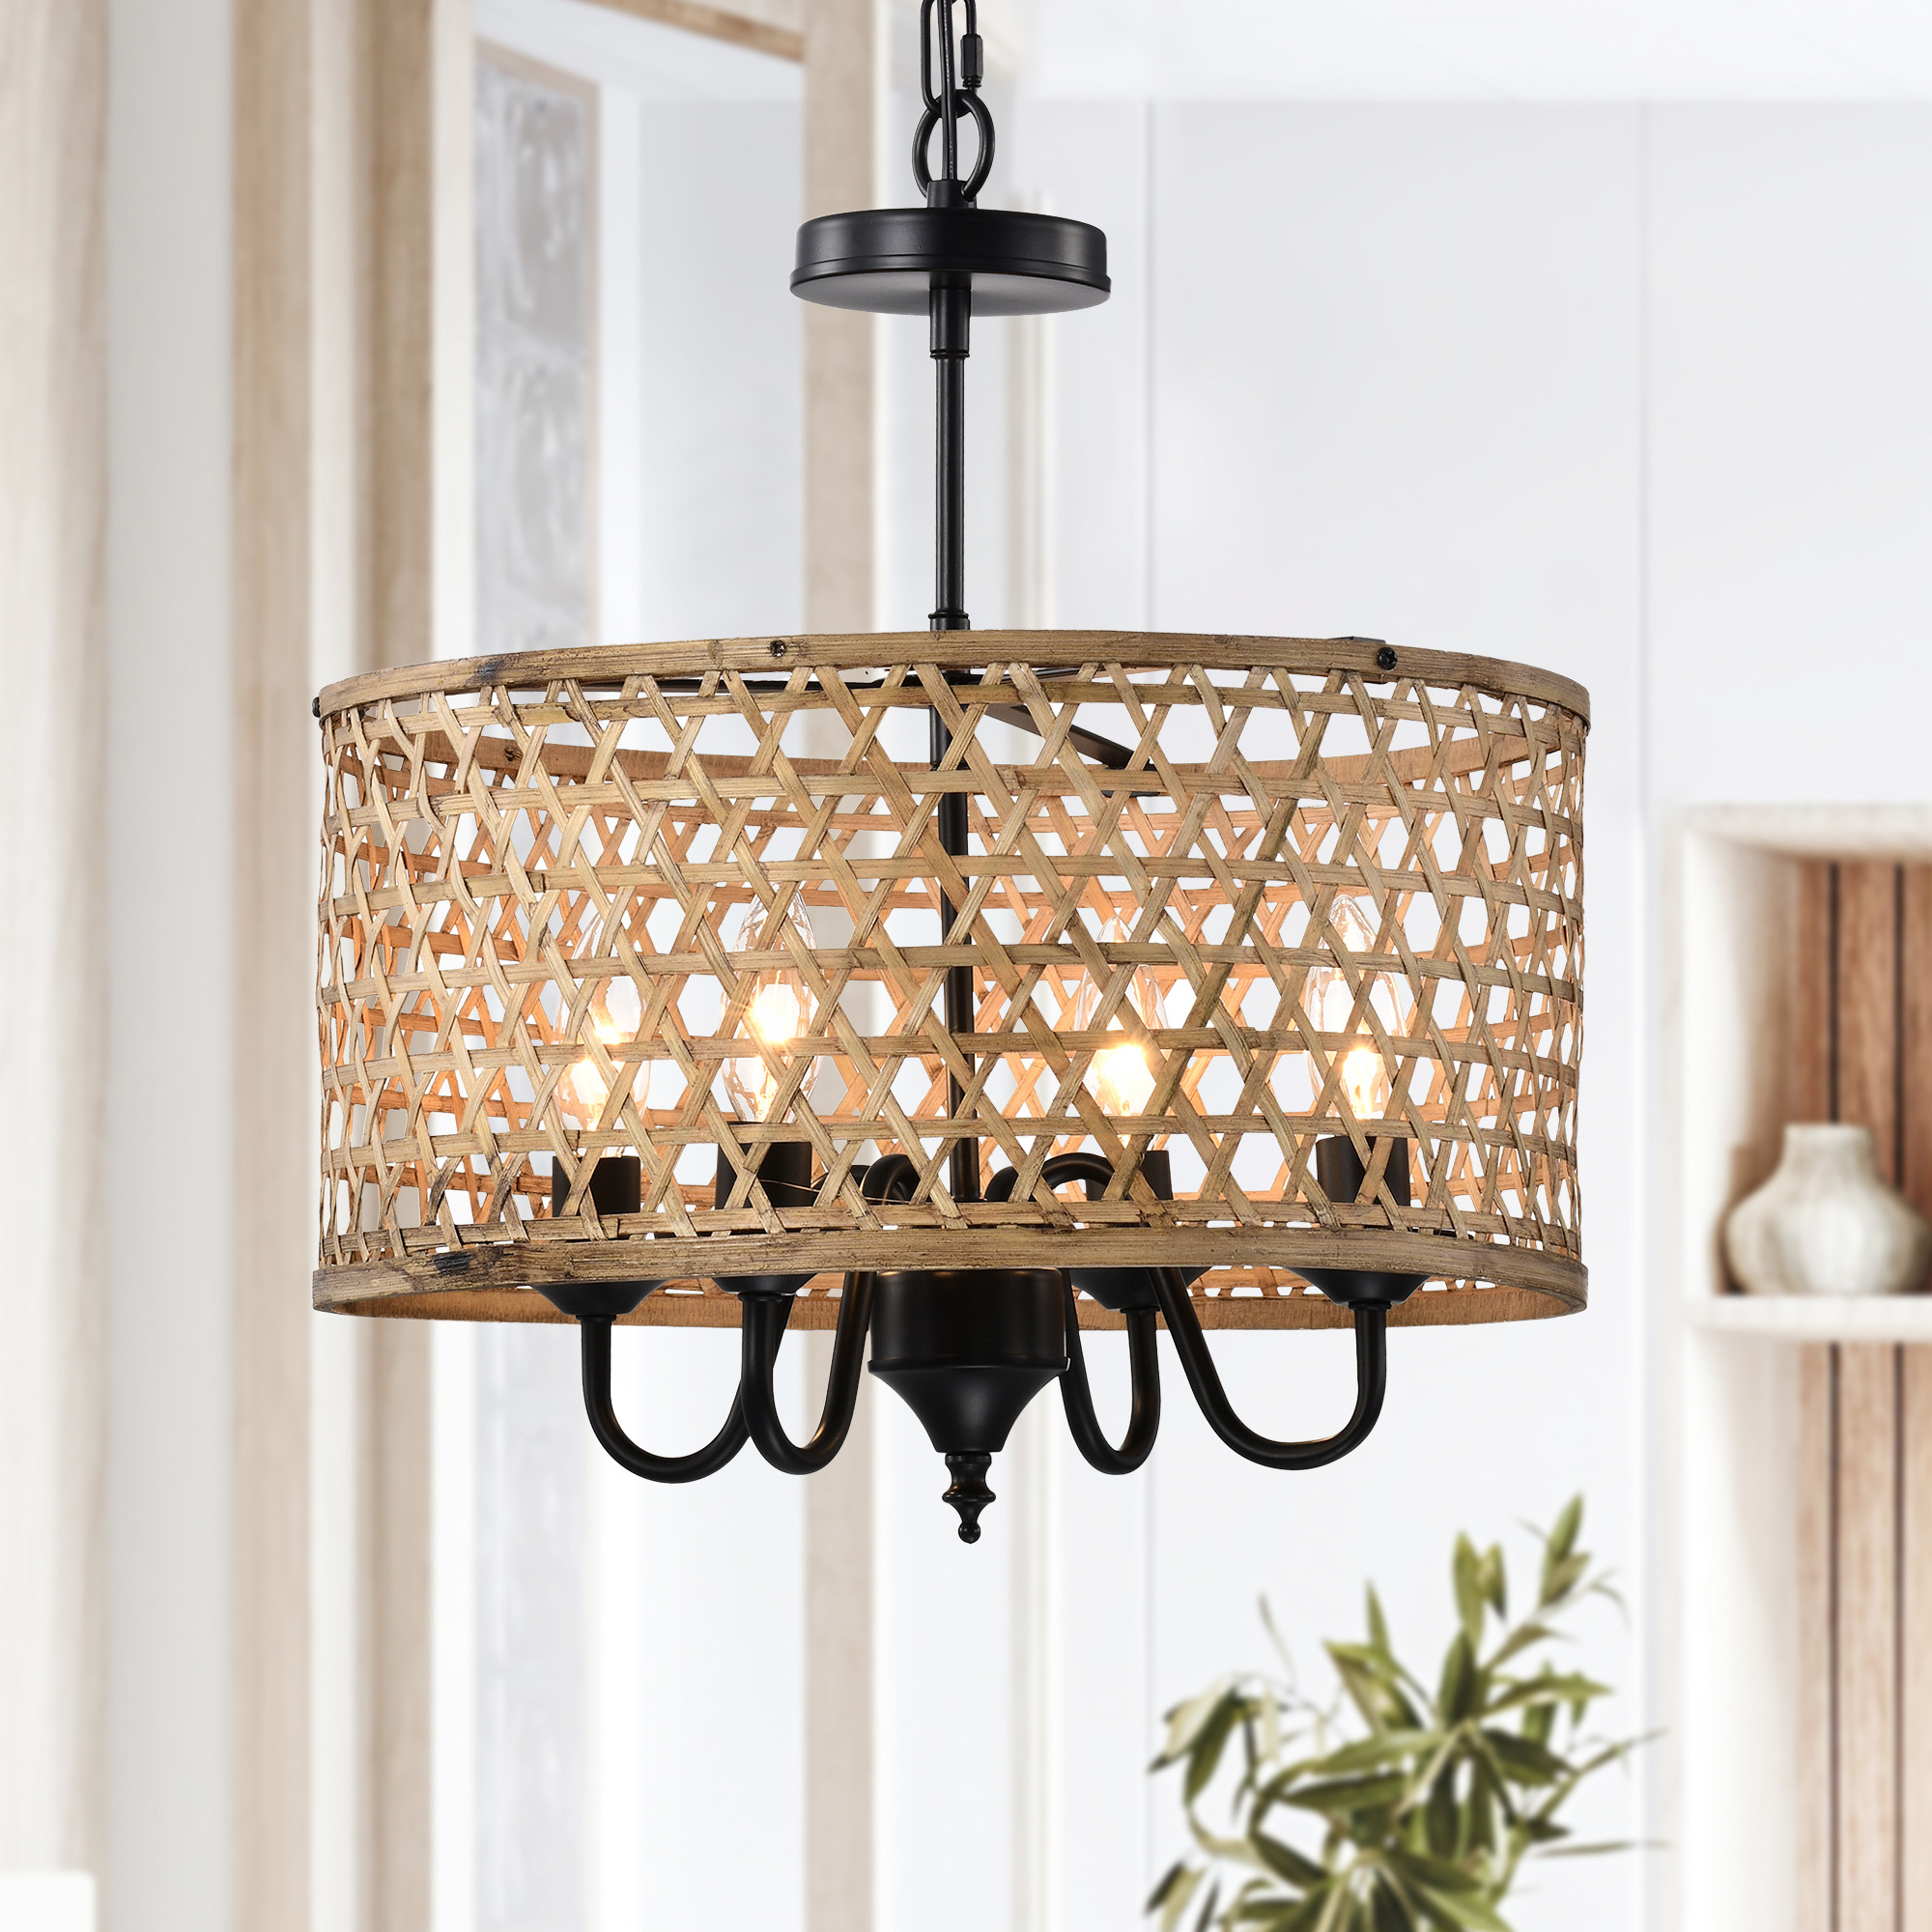 Dora 16 in. 4-Light Indoor Matte Black and Woven Rattan Finish Chandelier with Light Kit